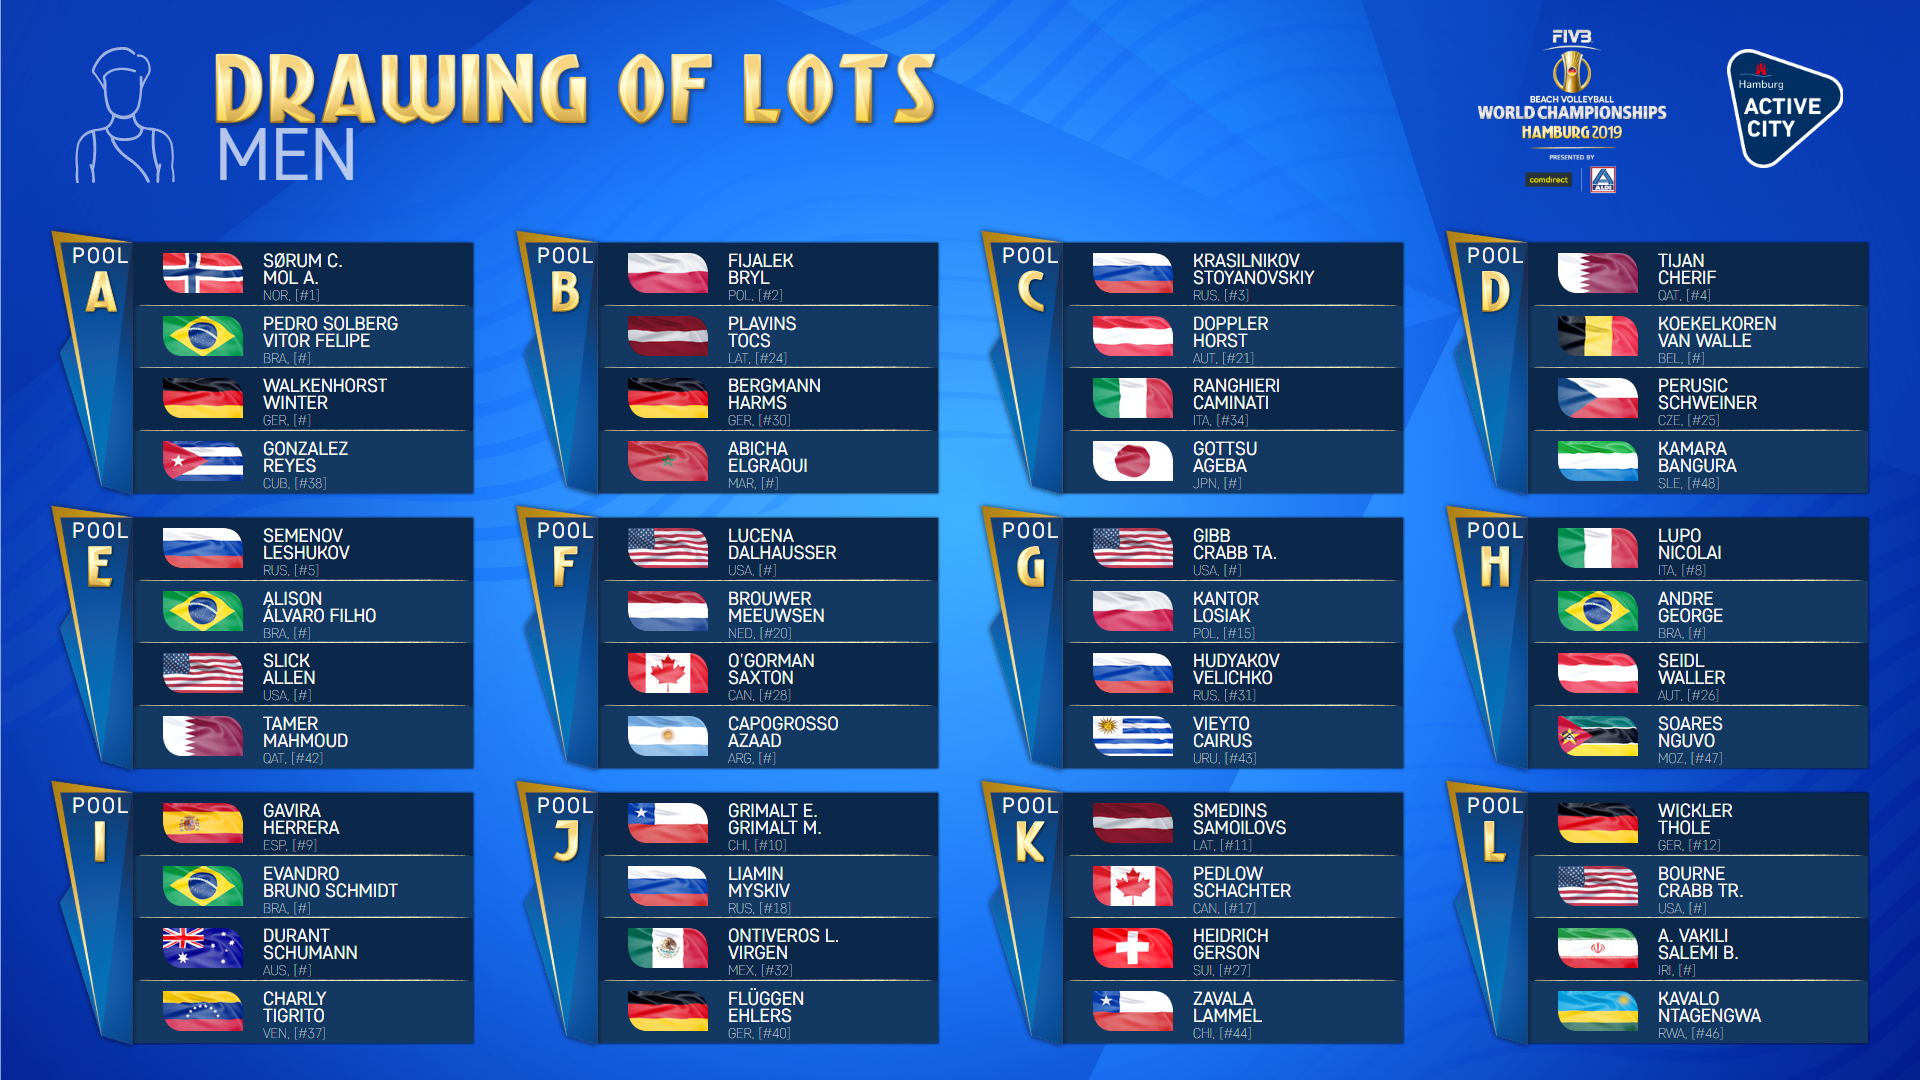 2019 FIVB WORLD CHAMPIONSHIPS POOL PLACEMENTS CONFIRMED - Asian